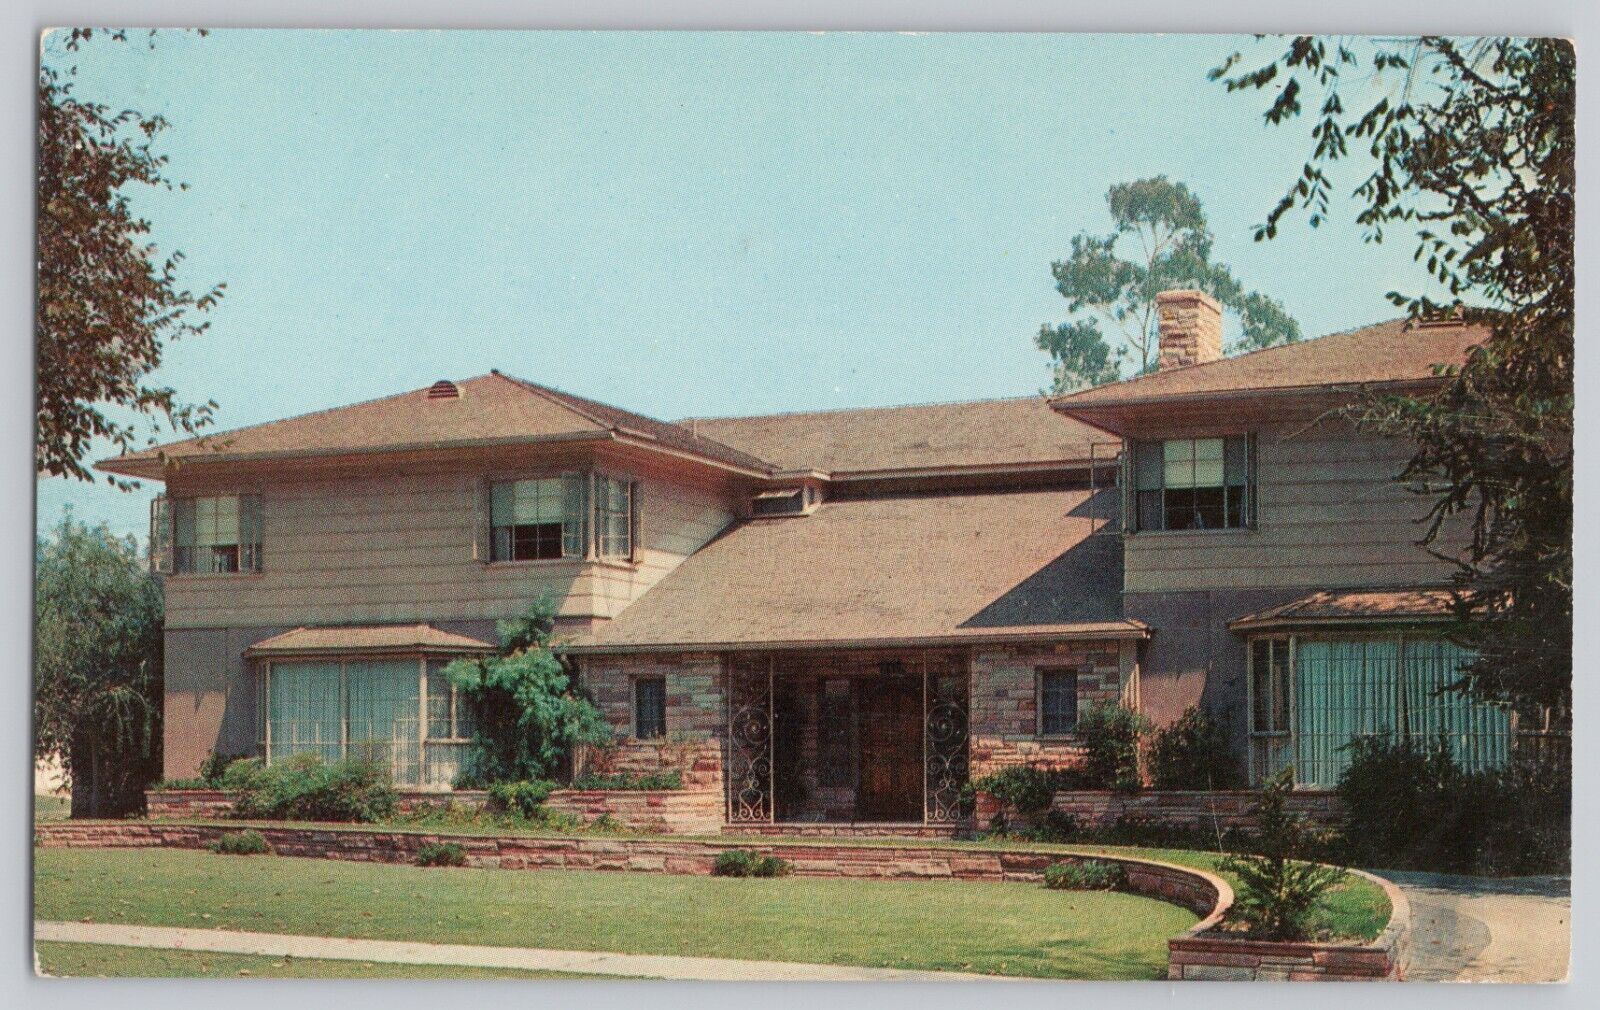 Home of Danny Thomas Beverly Hills CA TV & Movie Star Vintage Postcard Unposted